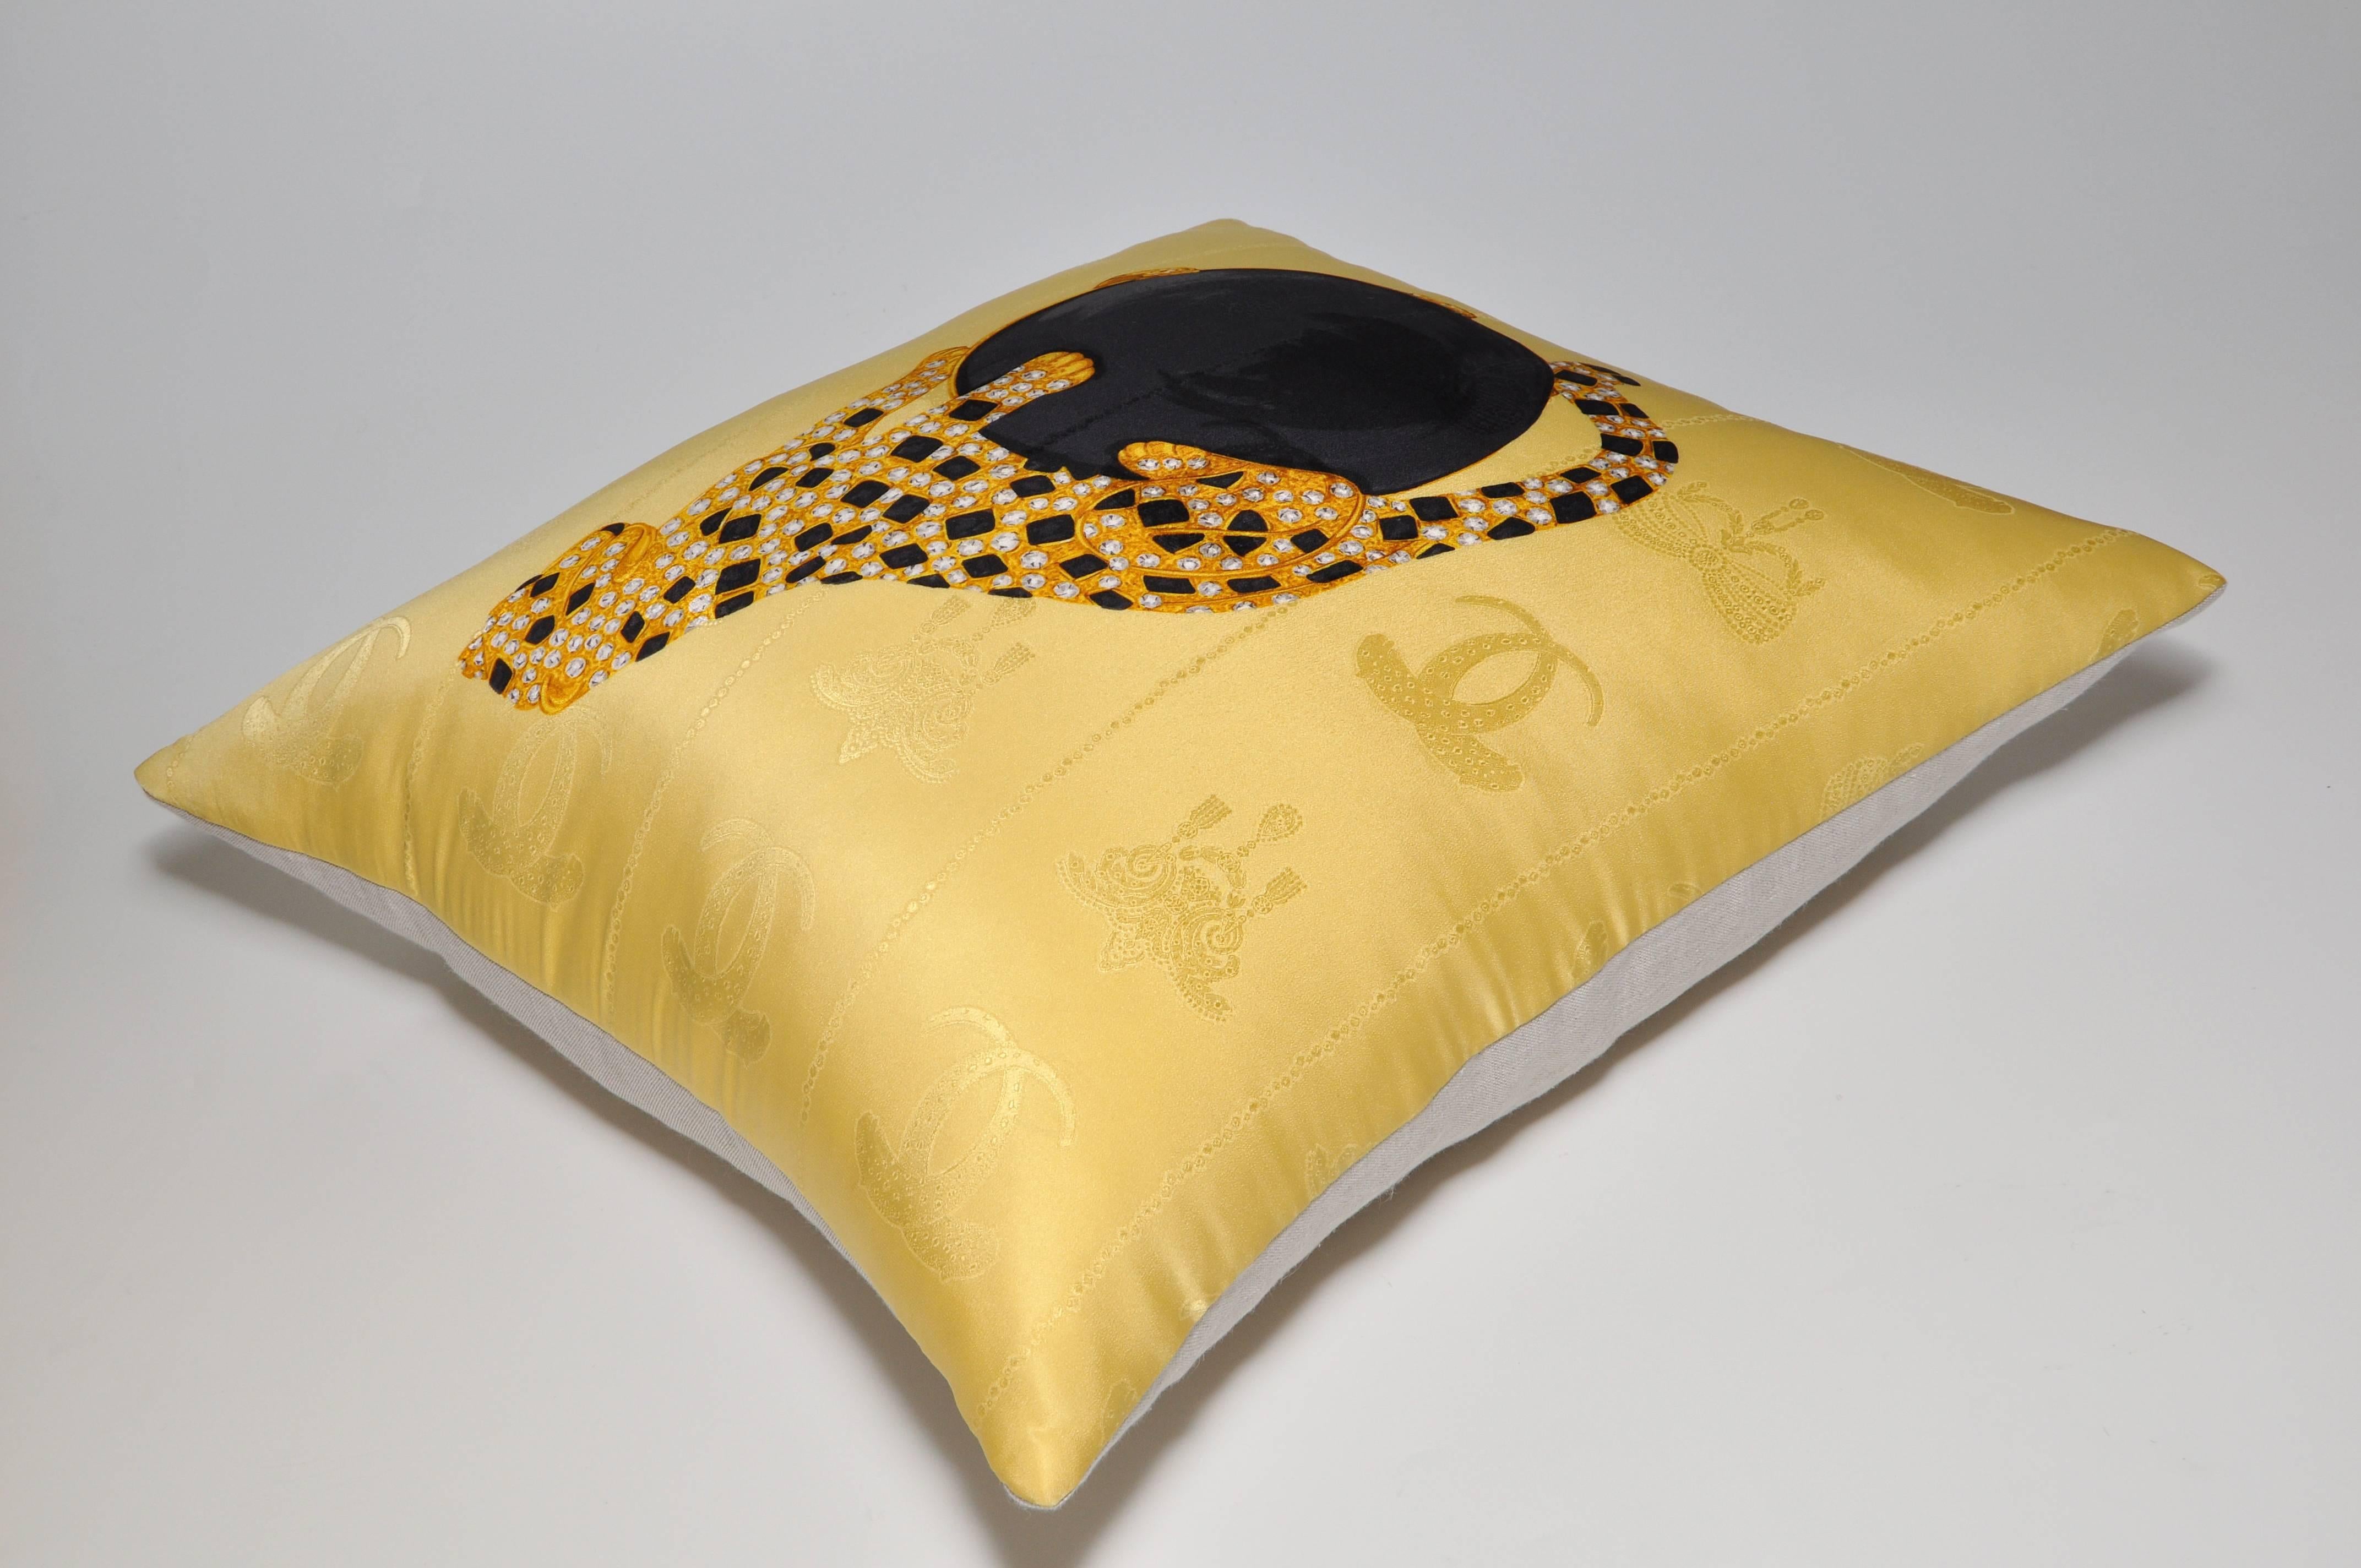 French Gold Vintage Cartier Panther Jewelry Silk Scarf Cushion Pillow